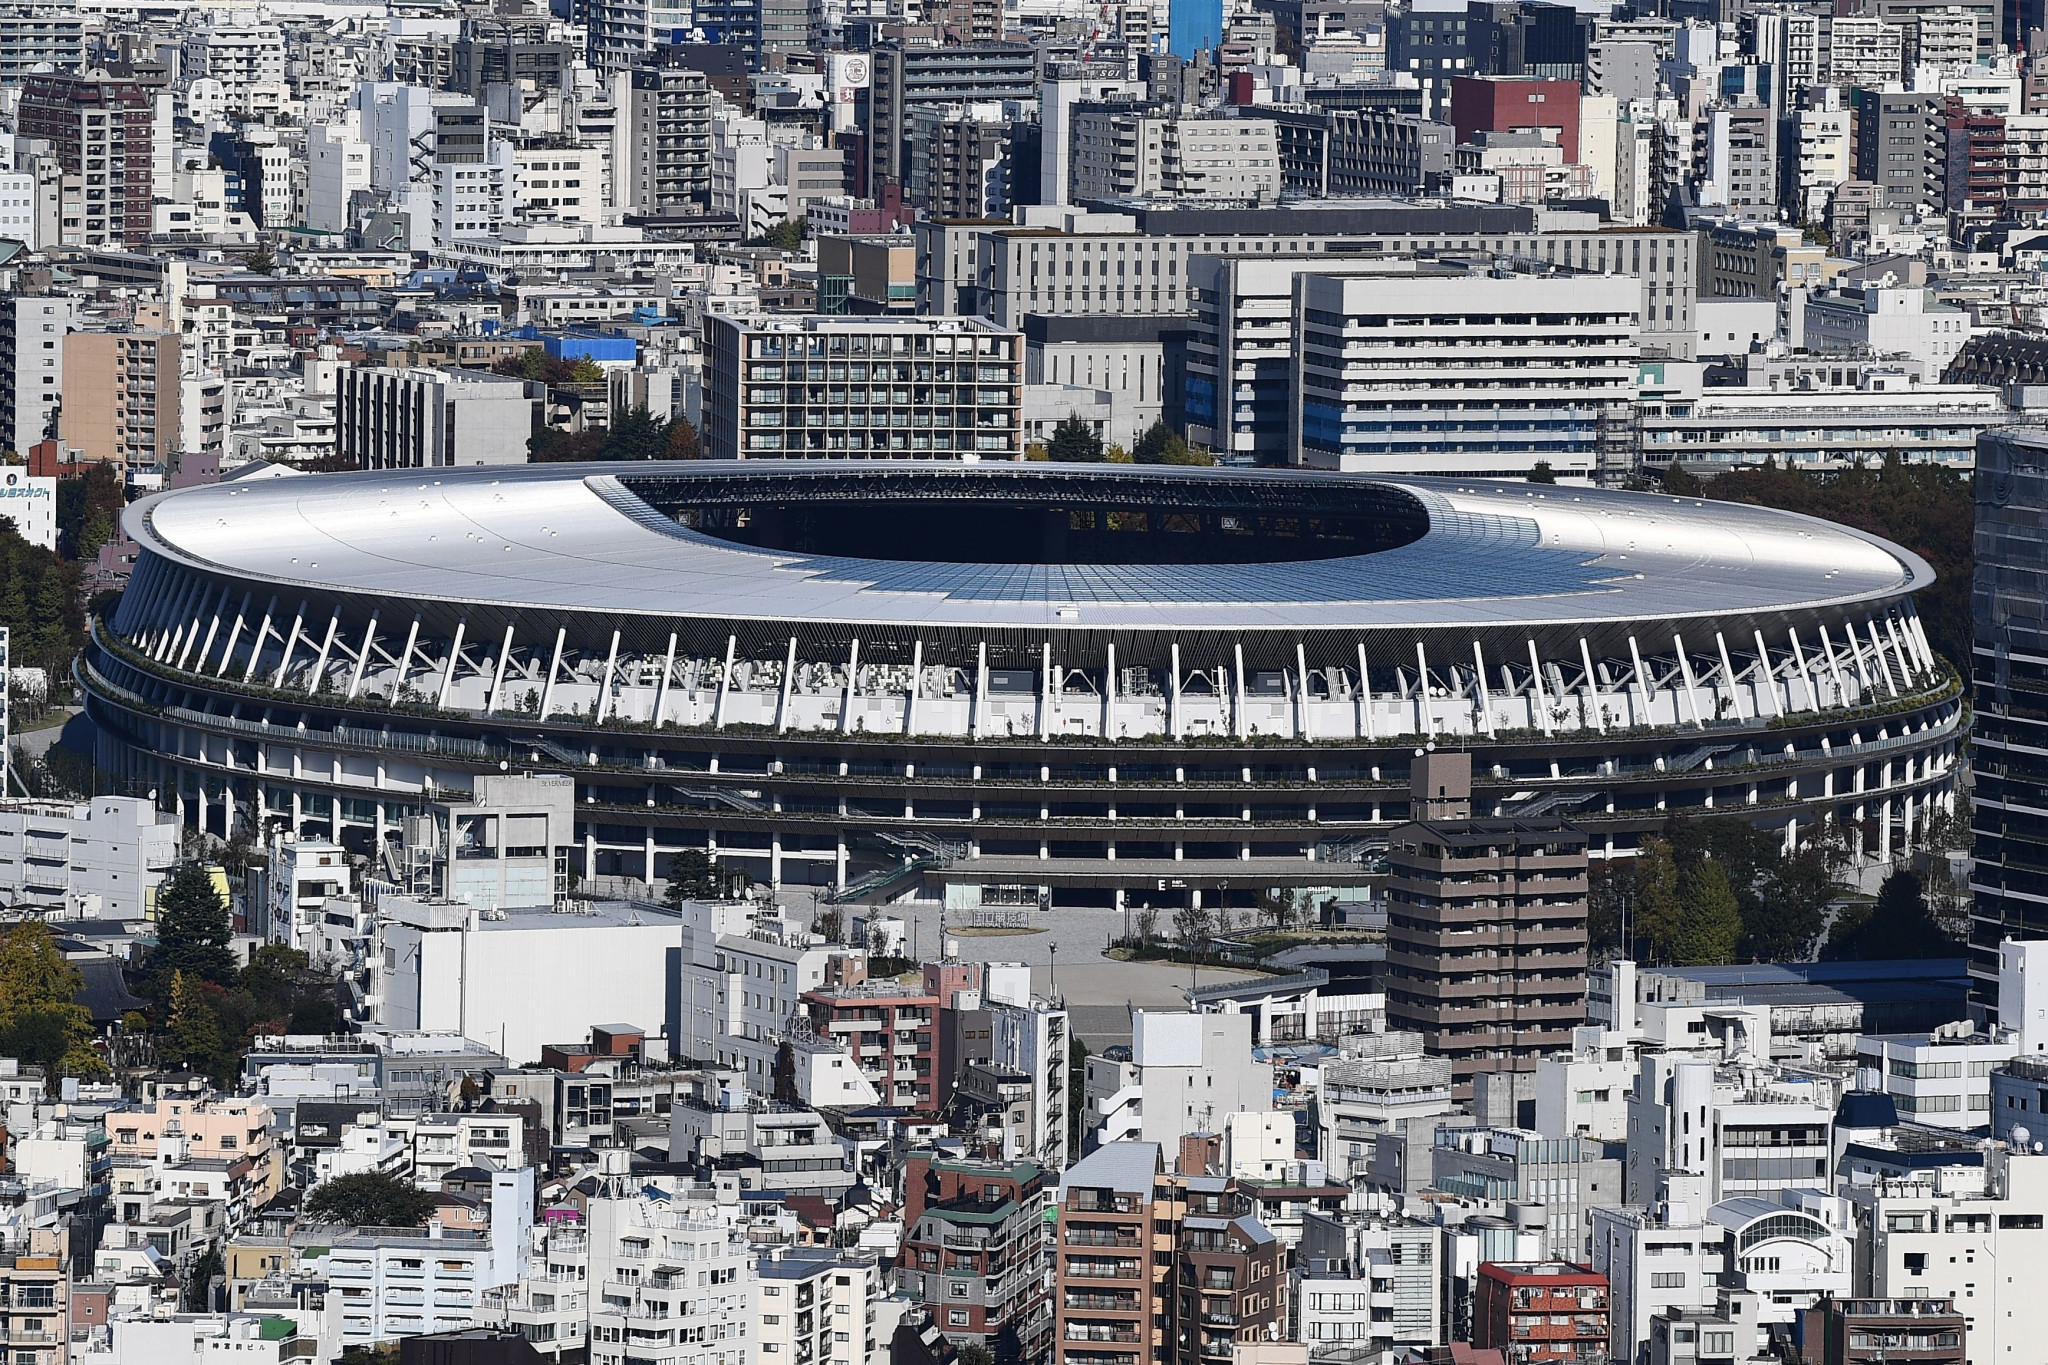 Tokyo 2020 National Stadium handed over to Japan Sport Council after completion